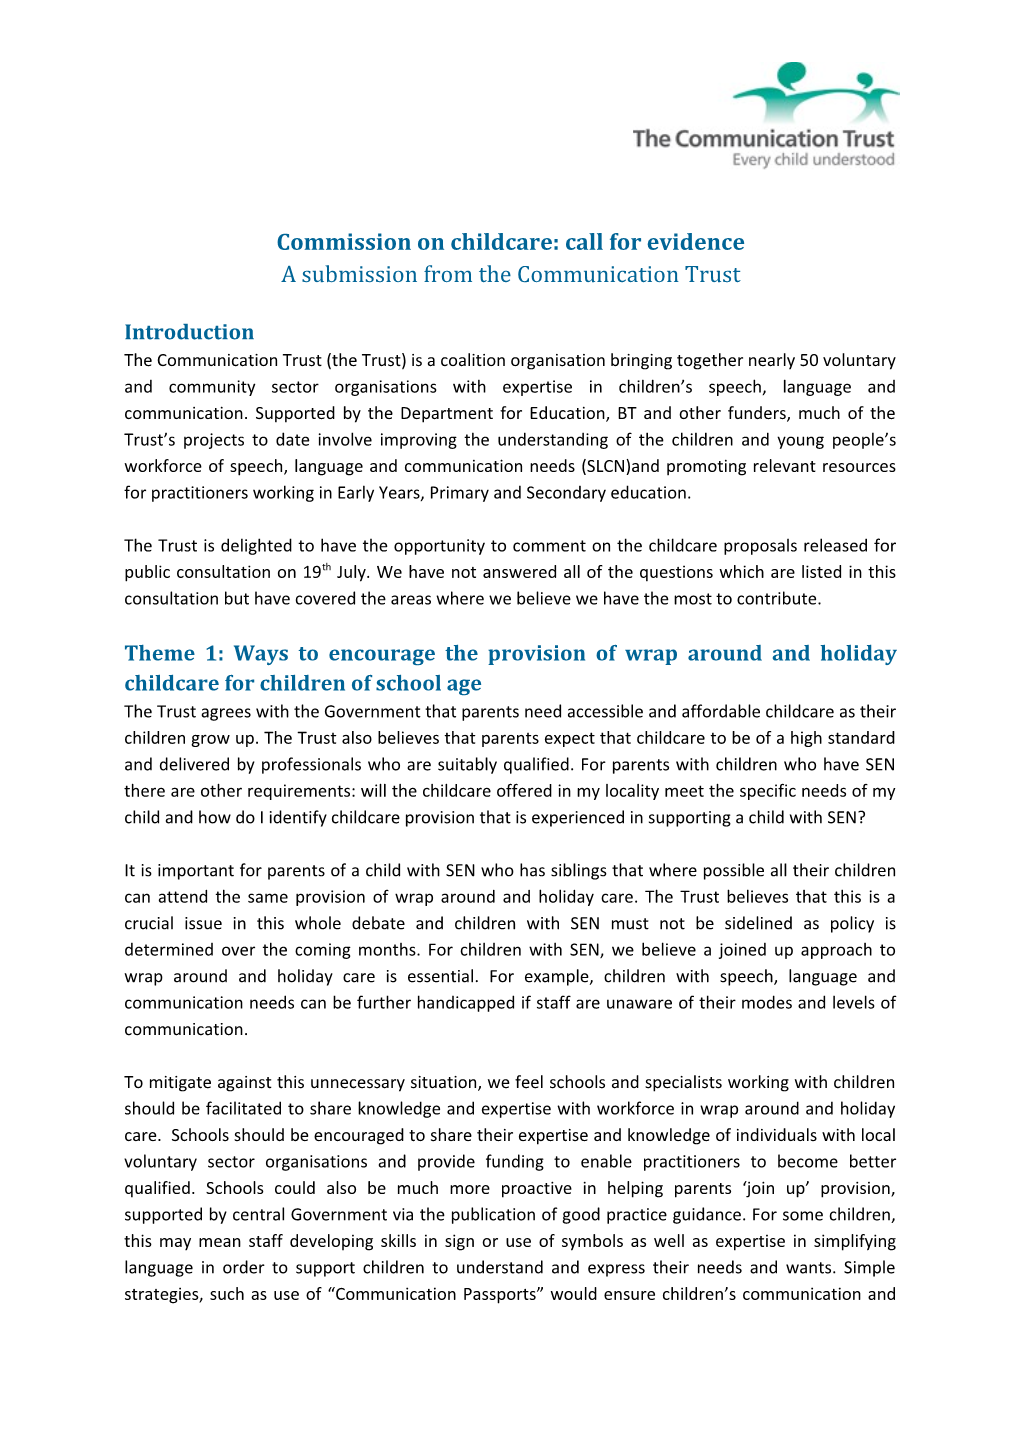 Commission on Childcare: Call for Evidence